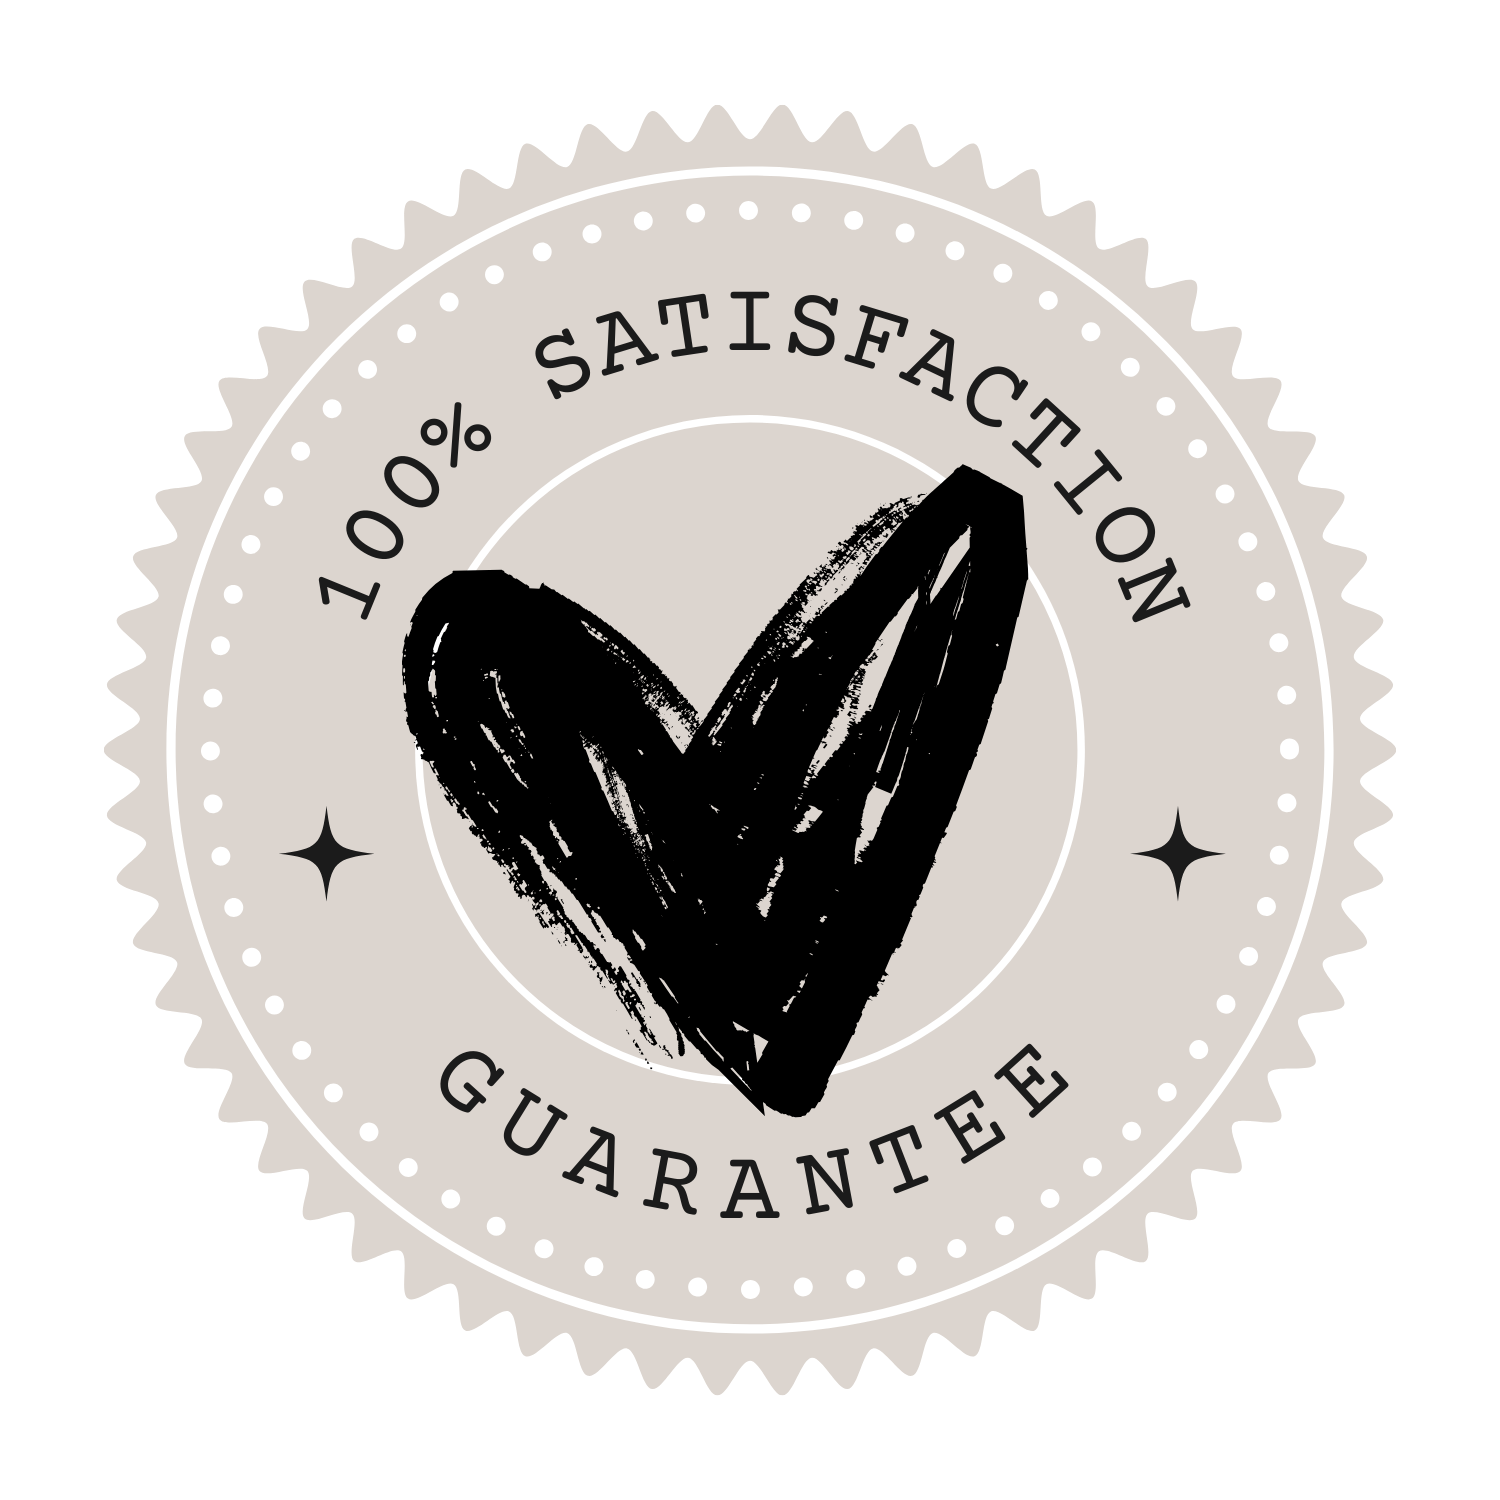 100% satisfaction guarantee for The Space, with a heart to express gratitude and honesty